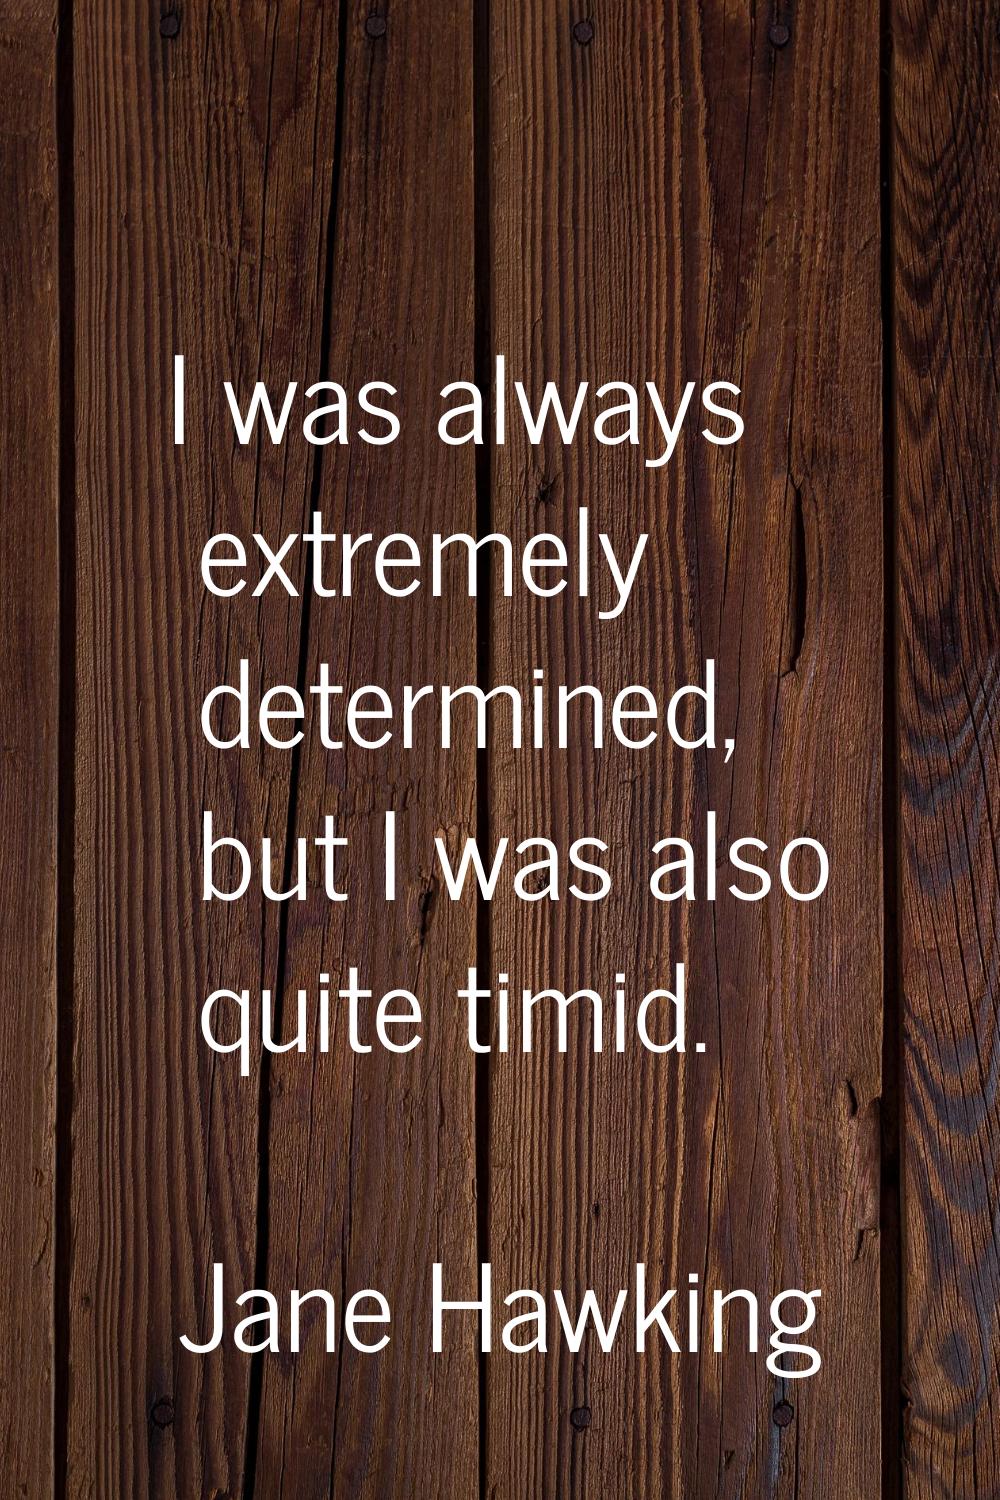 I was always extremely determined, but I was also quite timid.